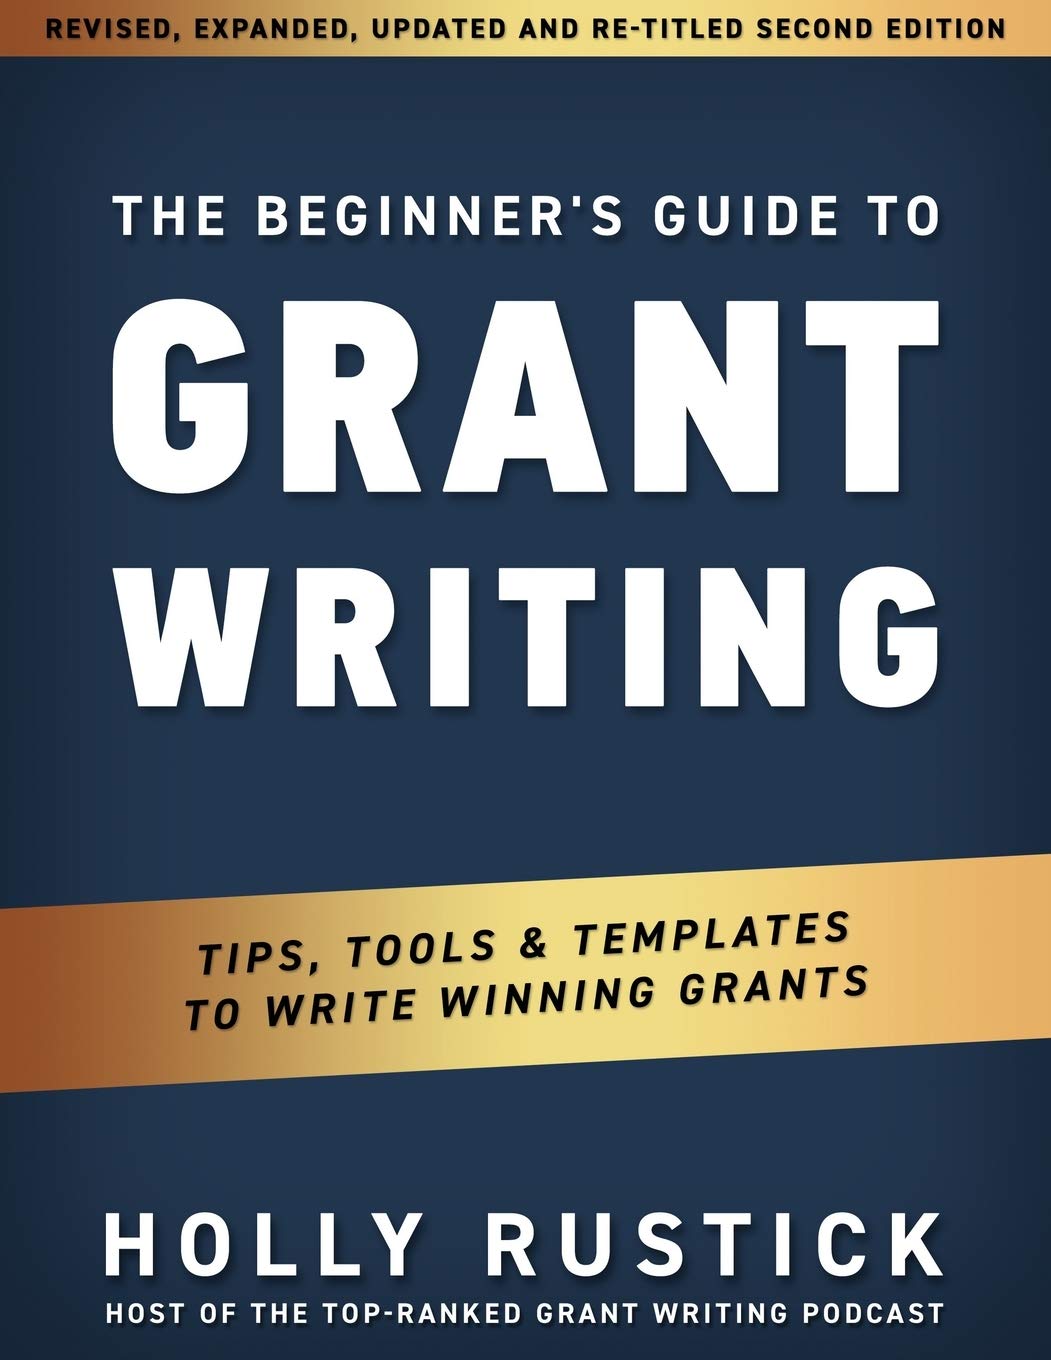 cool absolute beginners guide on becoming a grant writer references